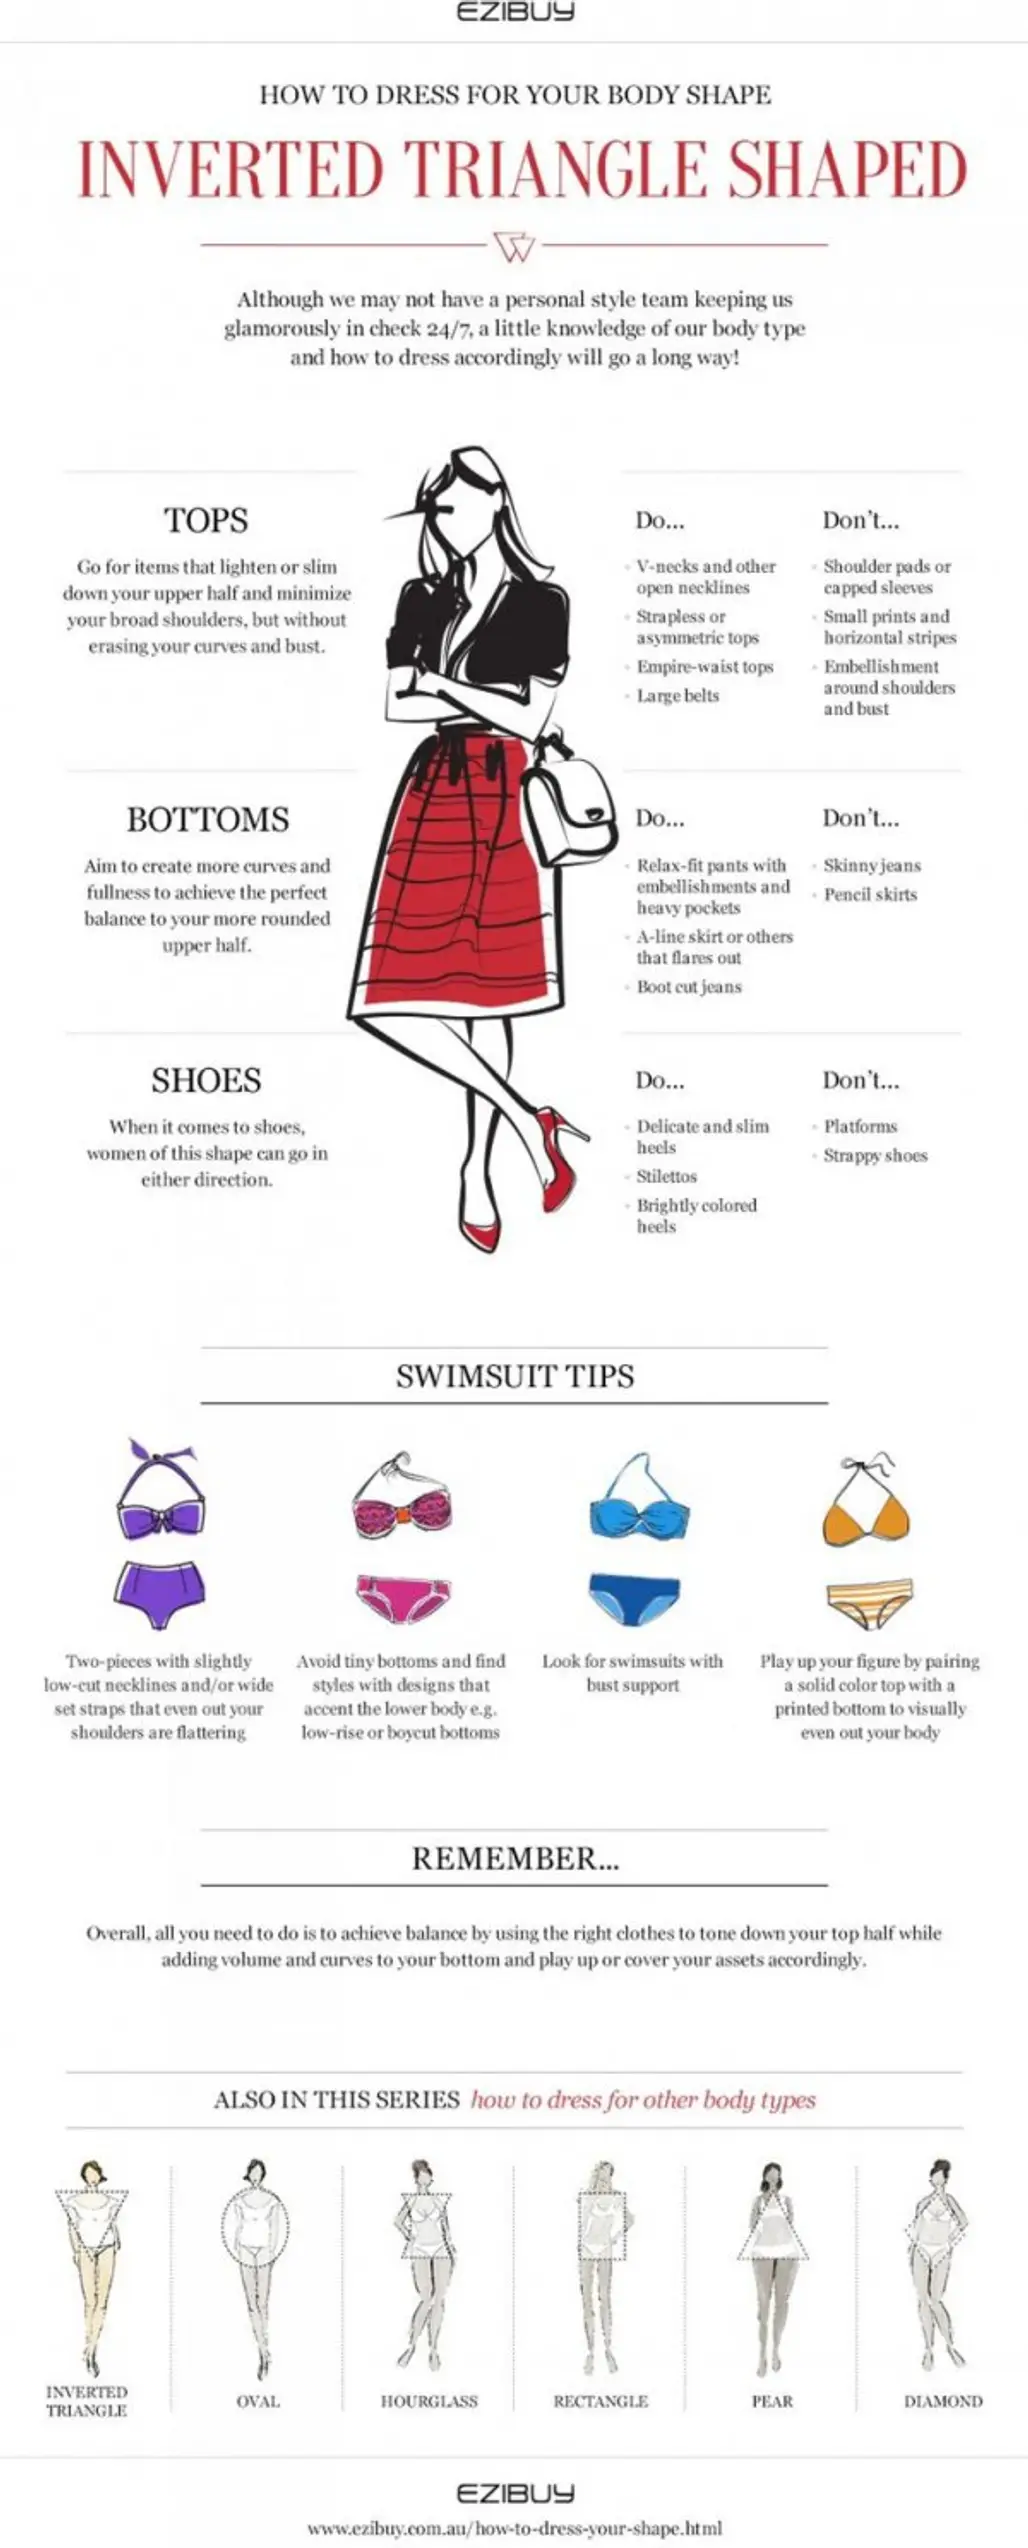 How to Dress for Your Body Shape - Inverted Triangle